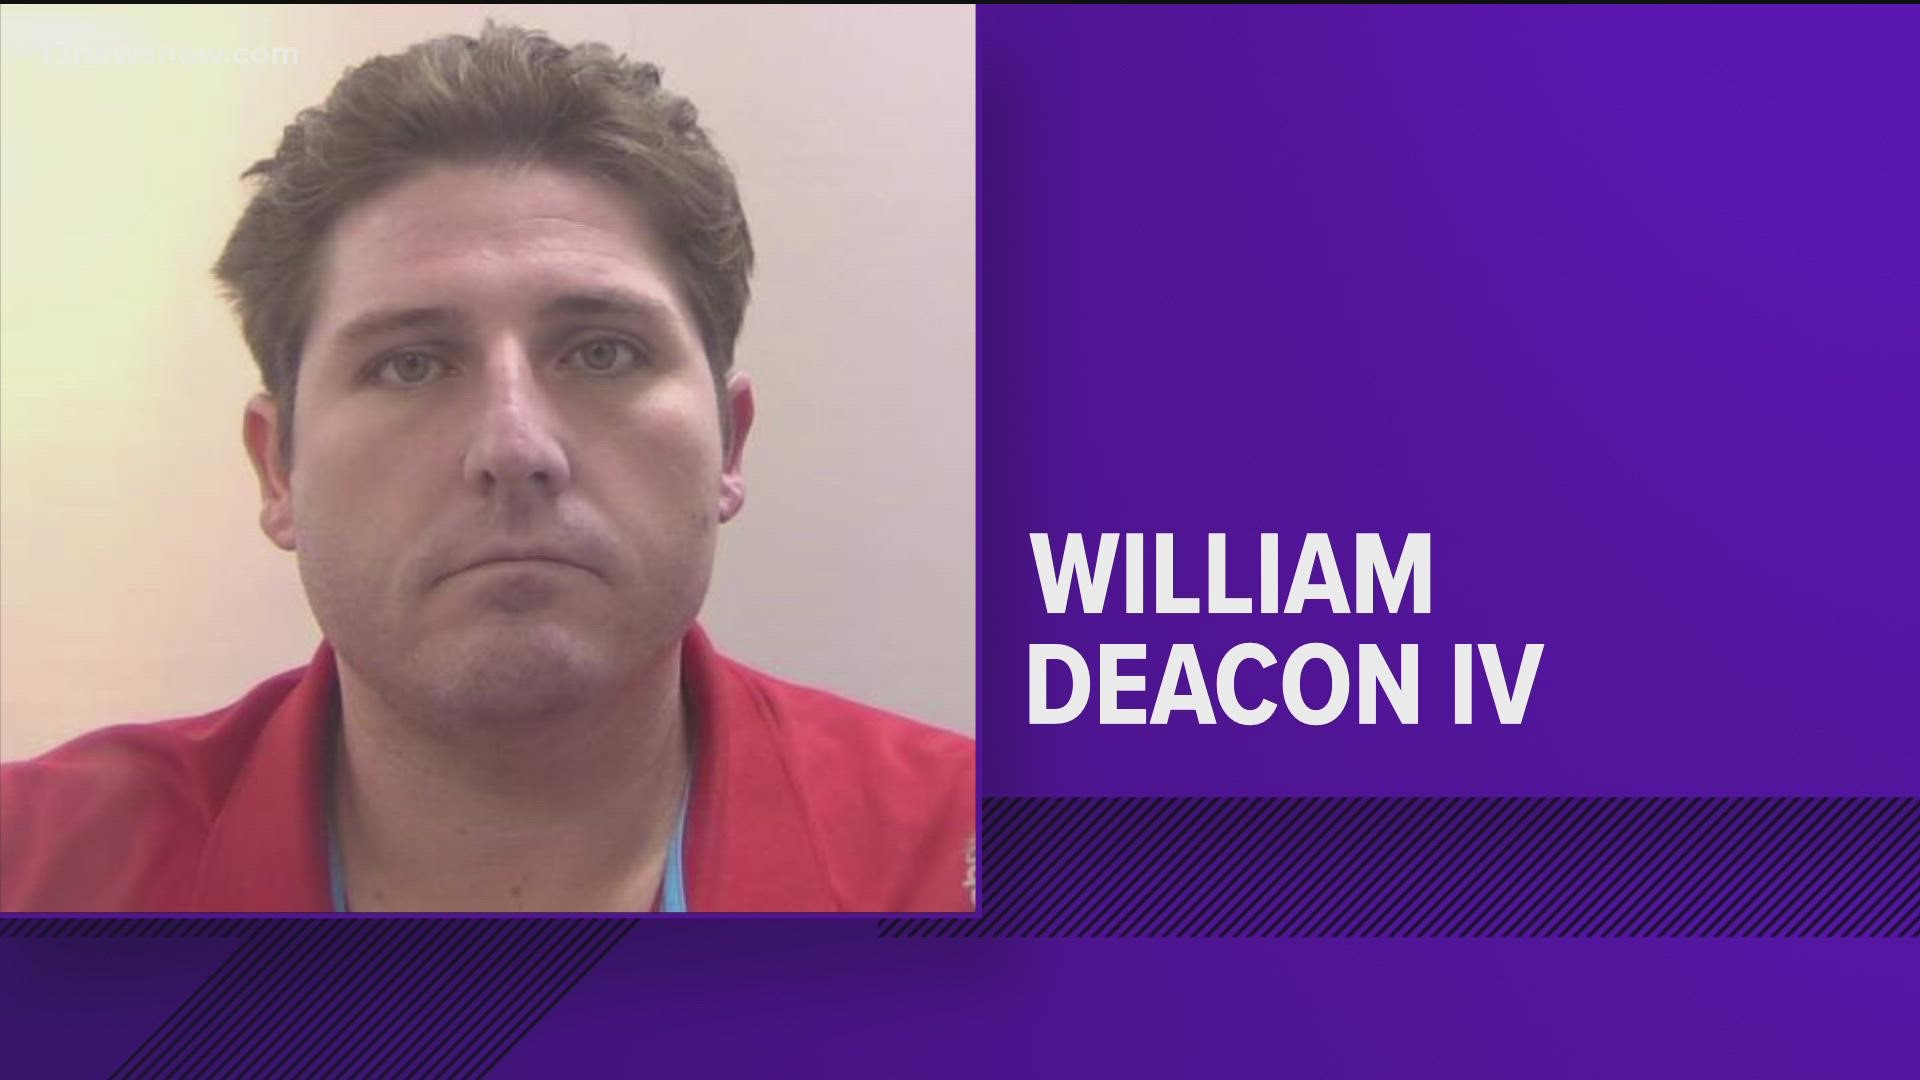 William Deacon's father said he wouldn't have access to the internet, and doesn't own a car. Prosecutors argued that having child porn isn't a victimless crime.